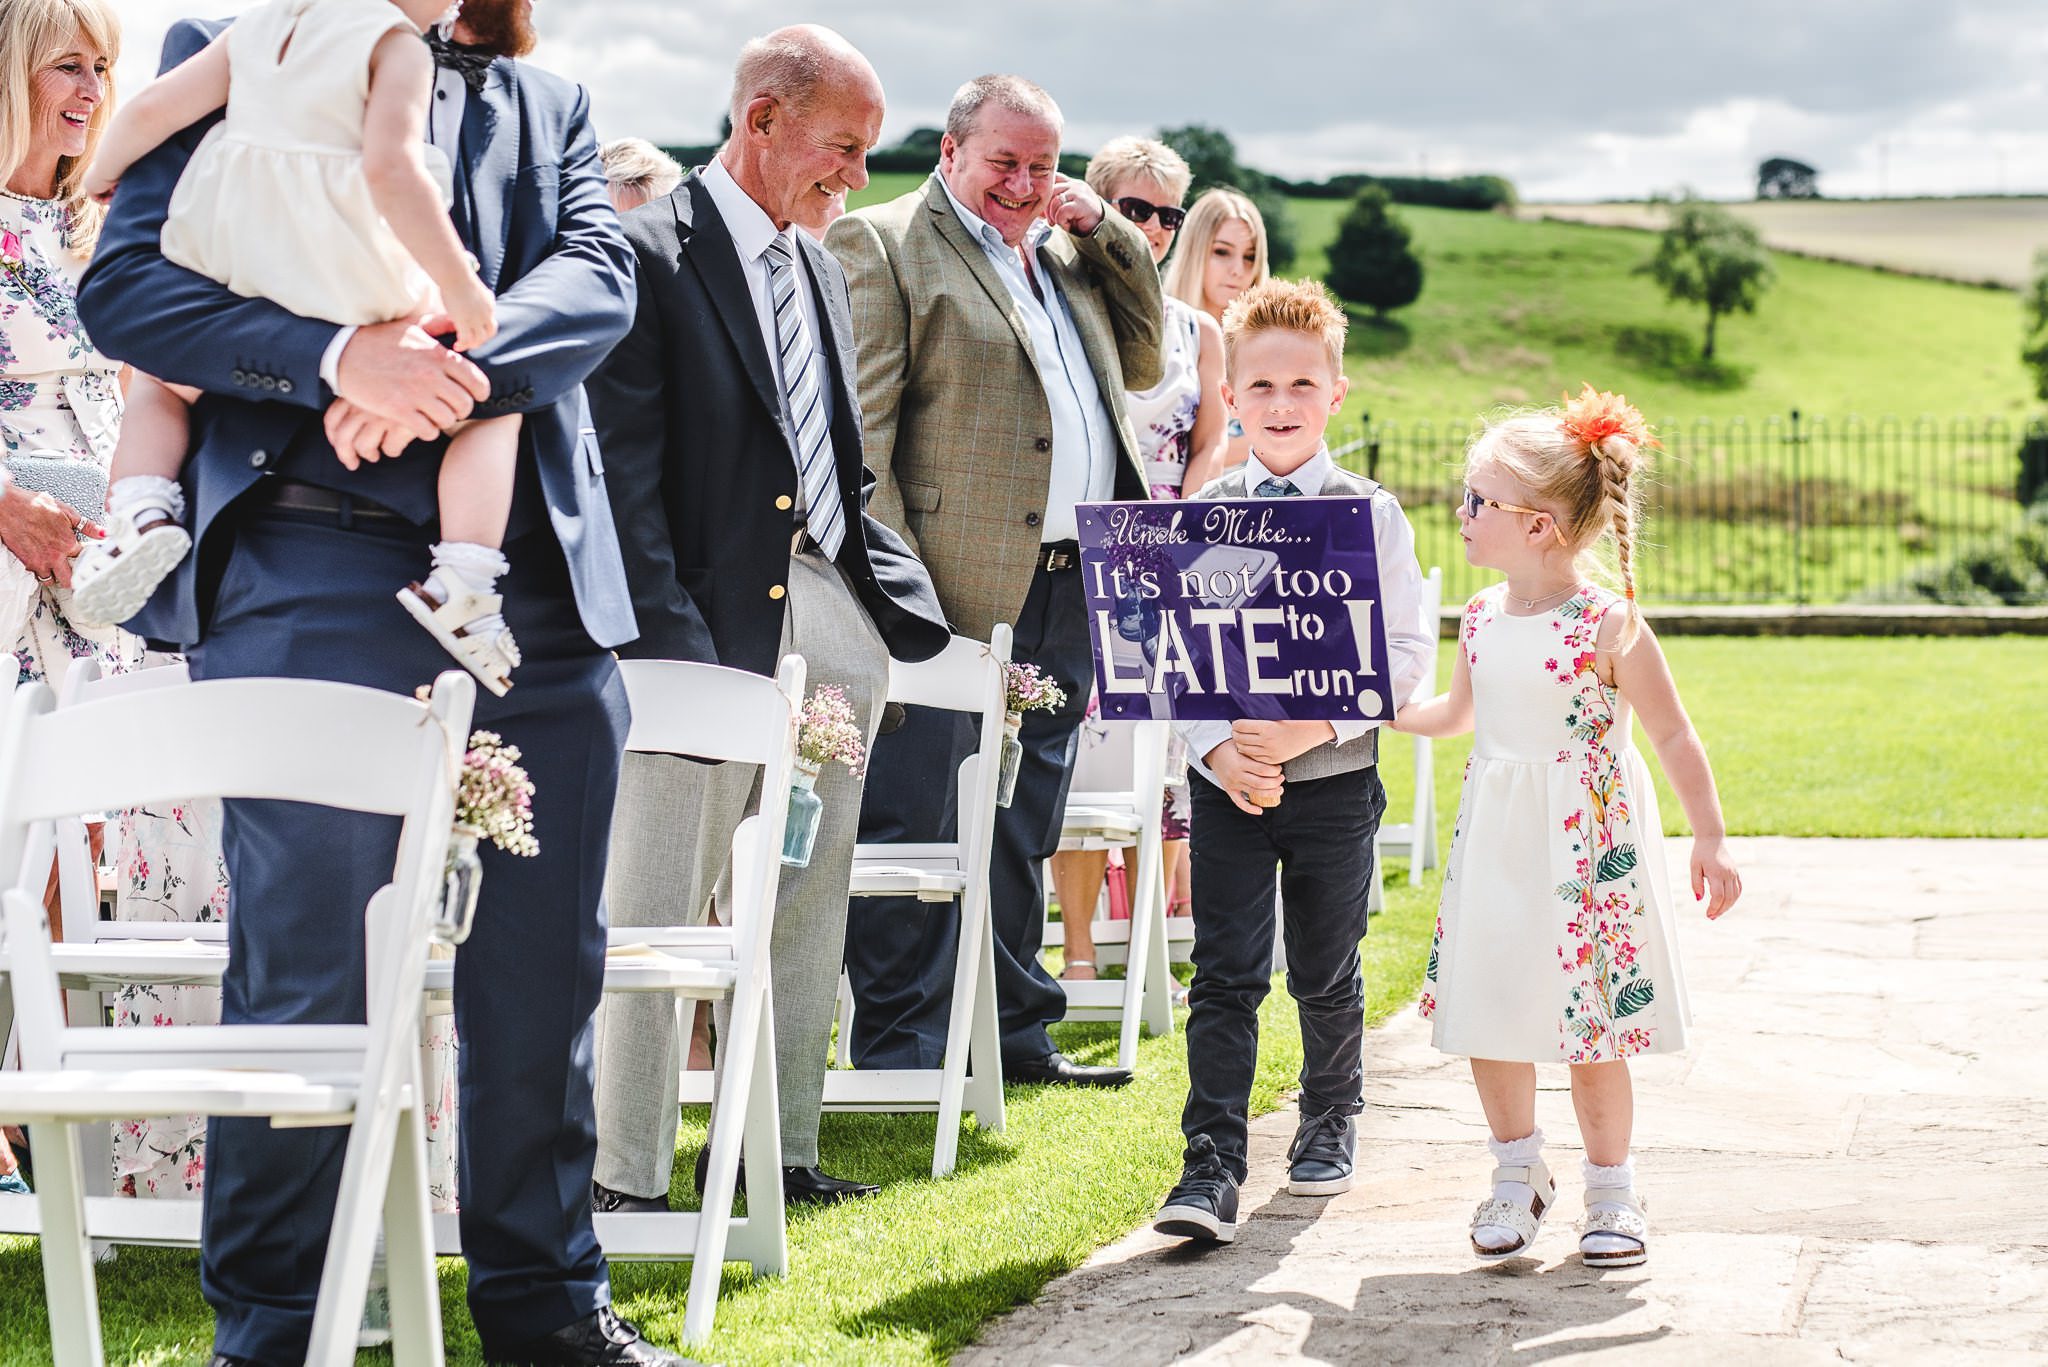 A page boy carrying a sign at a wedding